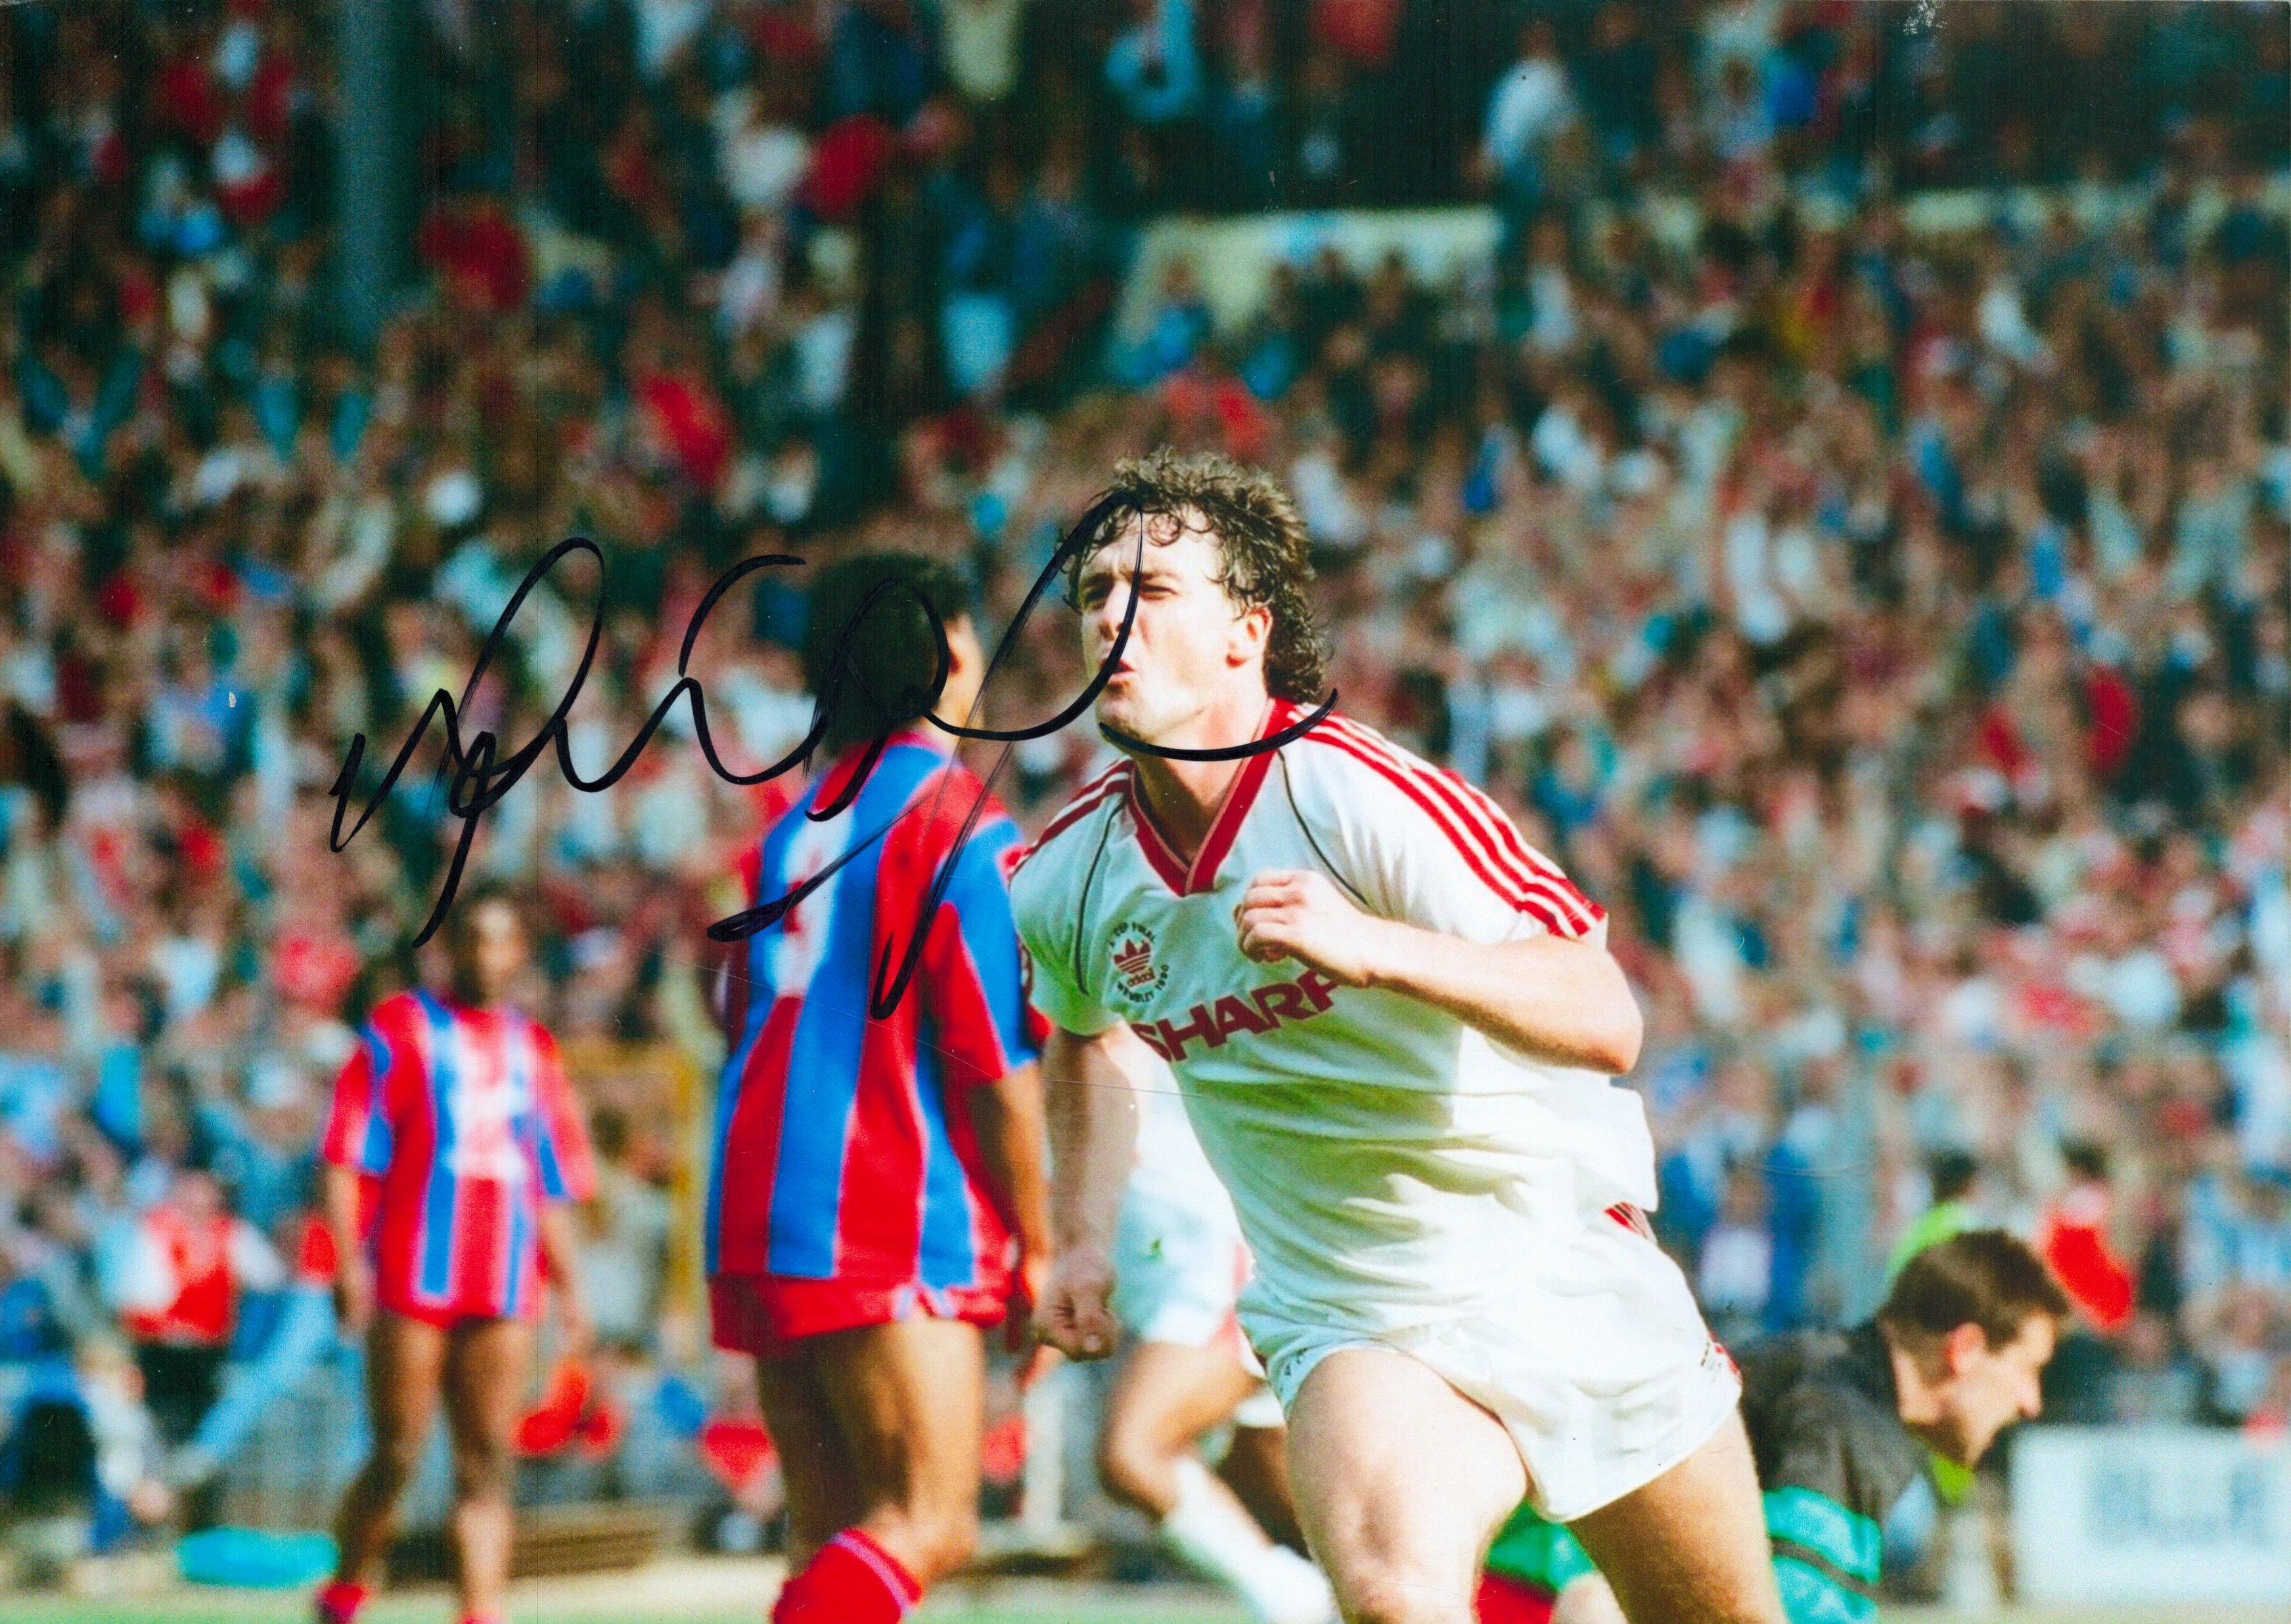 Mark Hughes signed Manchester United 12x8 colour photo. Good condition. All autographs come with a